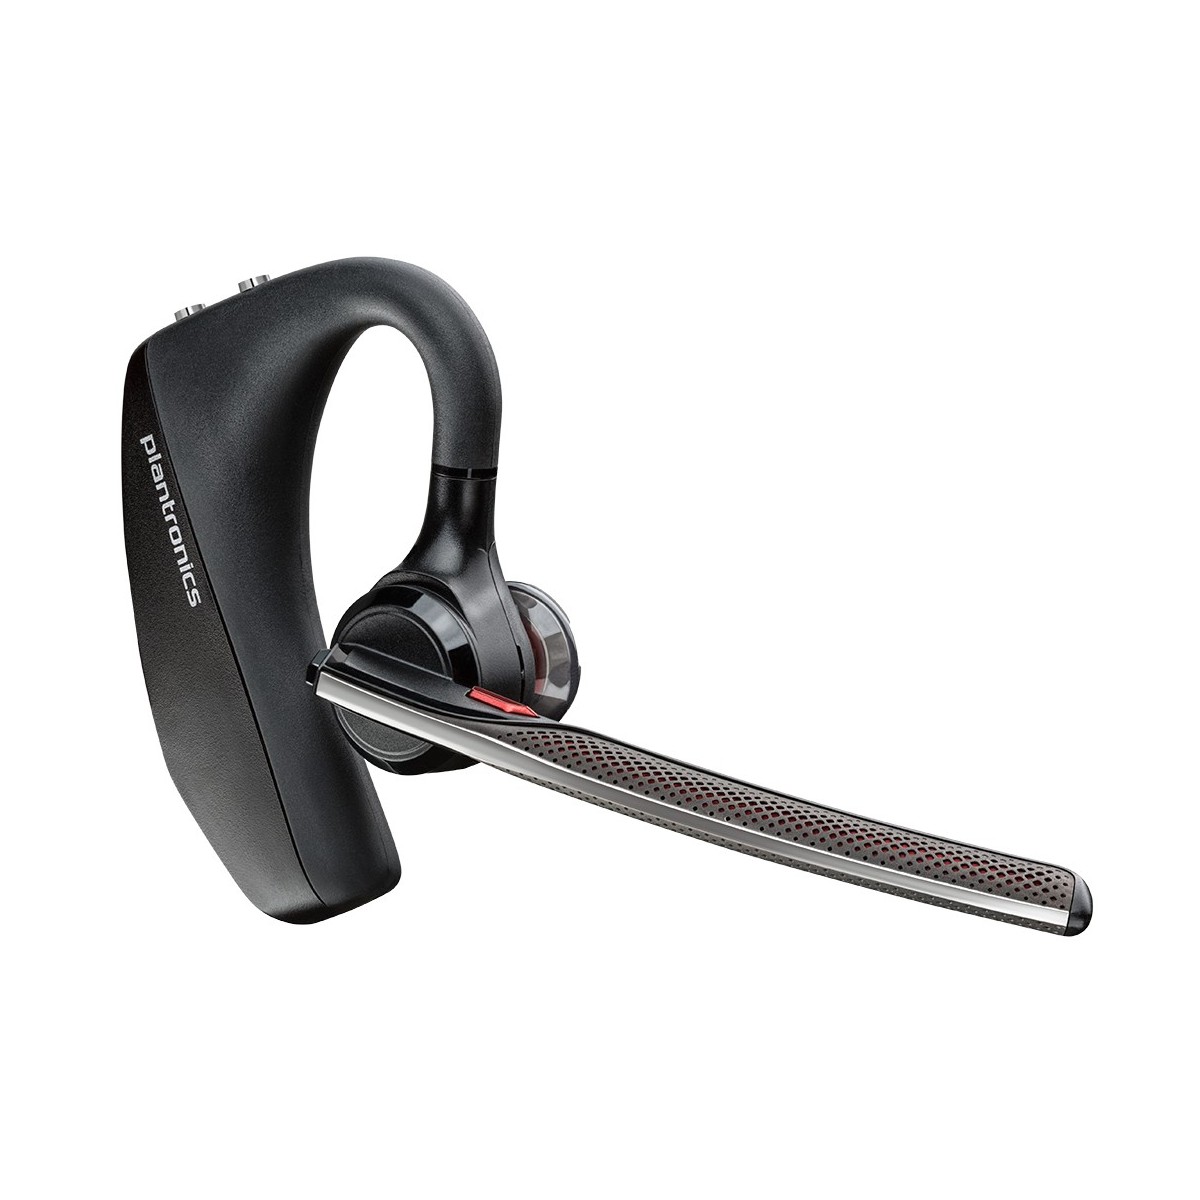 Poly Voyager 5200 Office - Headset - Boom - Ear-hook,In-ear - Office/Call center - Black - Monaural